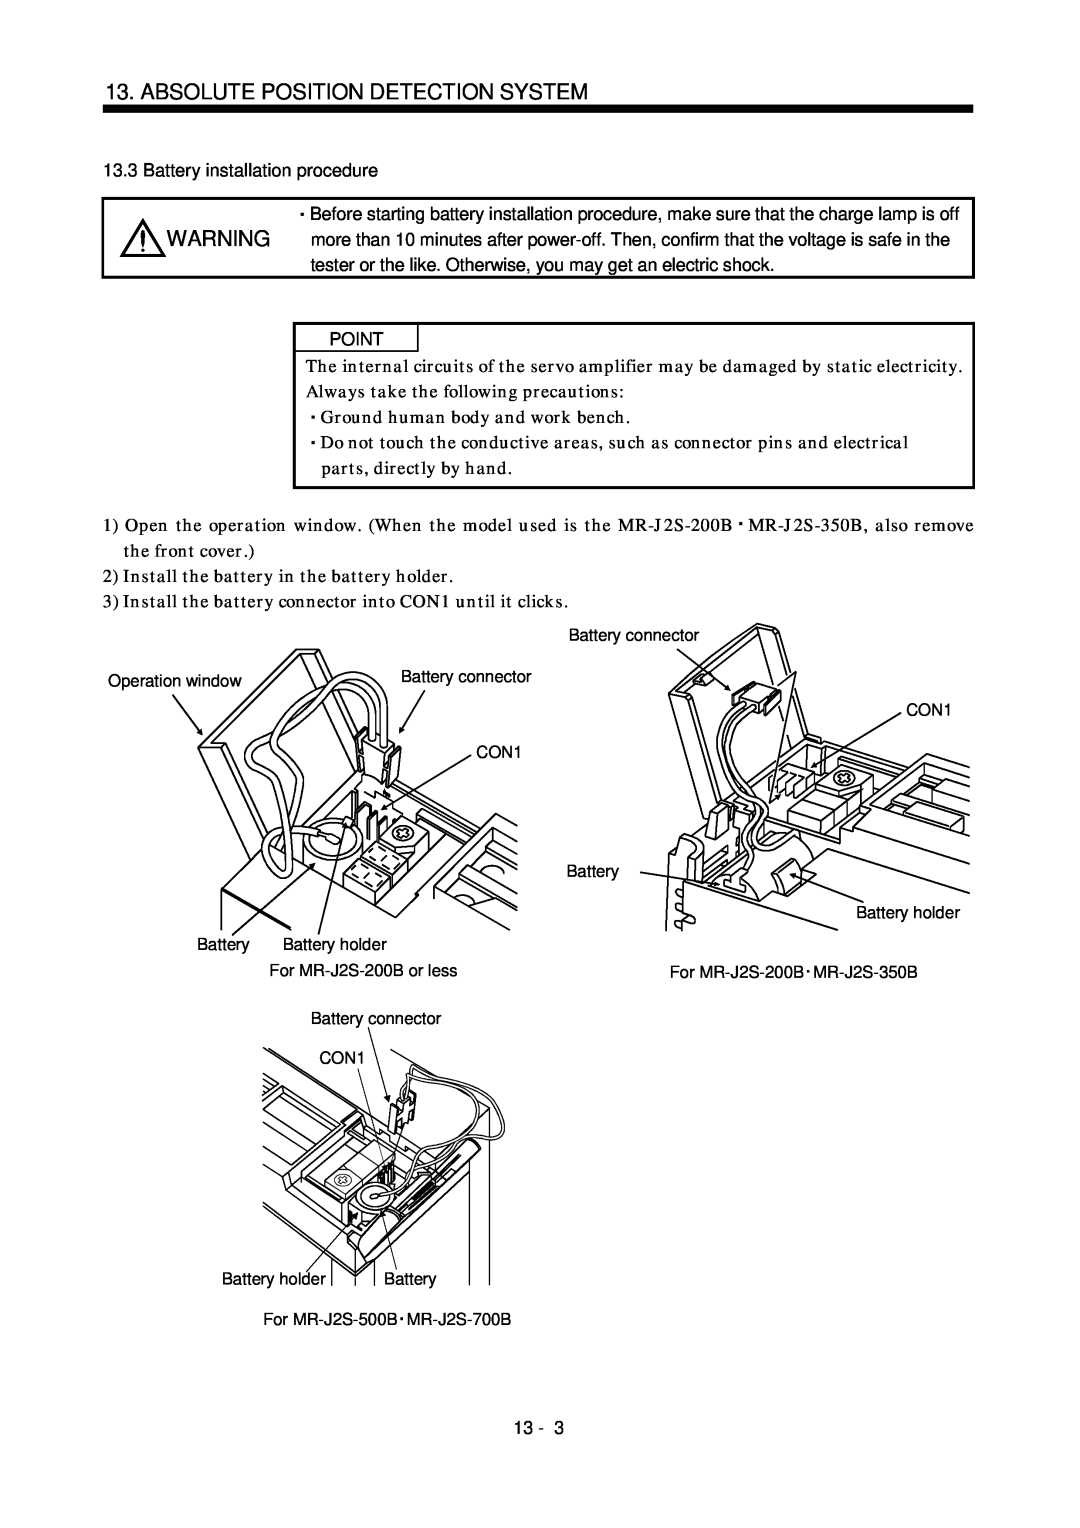 Bose MR-J2S- B instruction manual Battery installation procedure, Absolute Position Detection System, Point, 13 